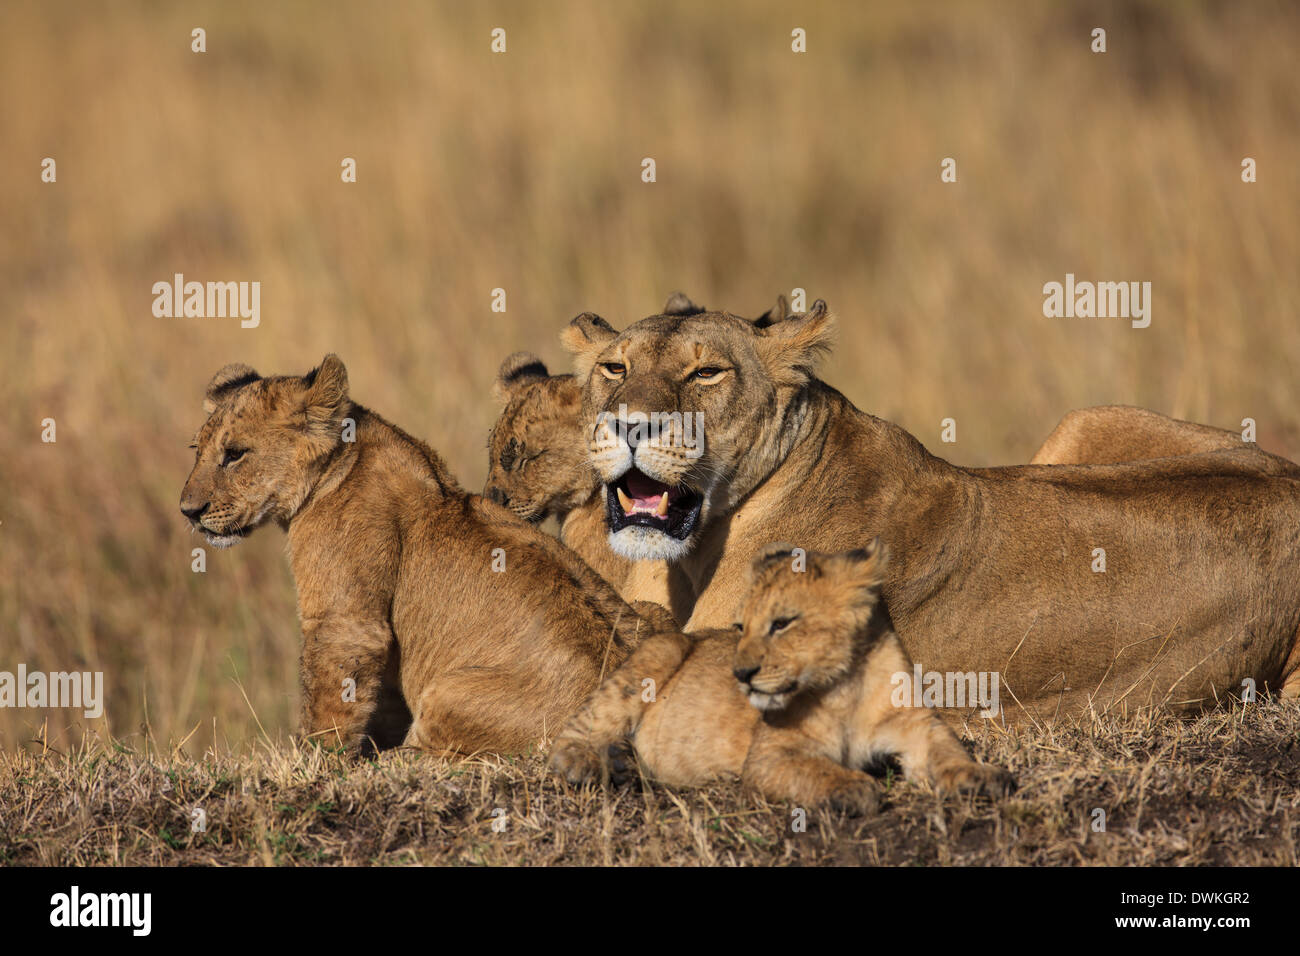 Lioness with cubs Stock Photo